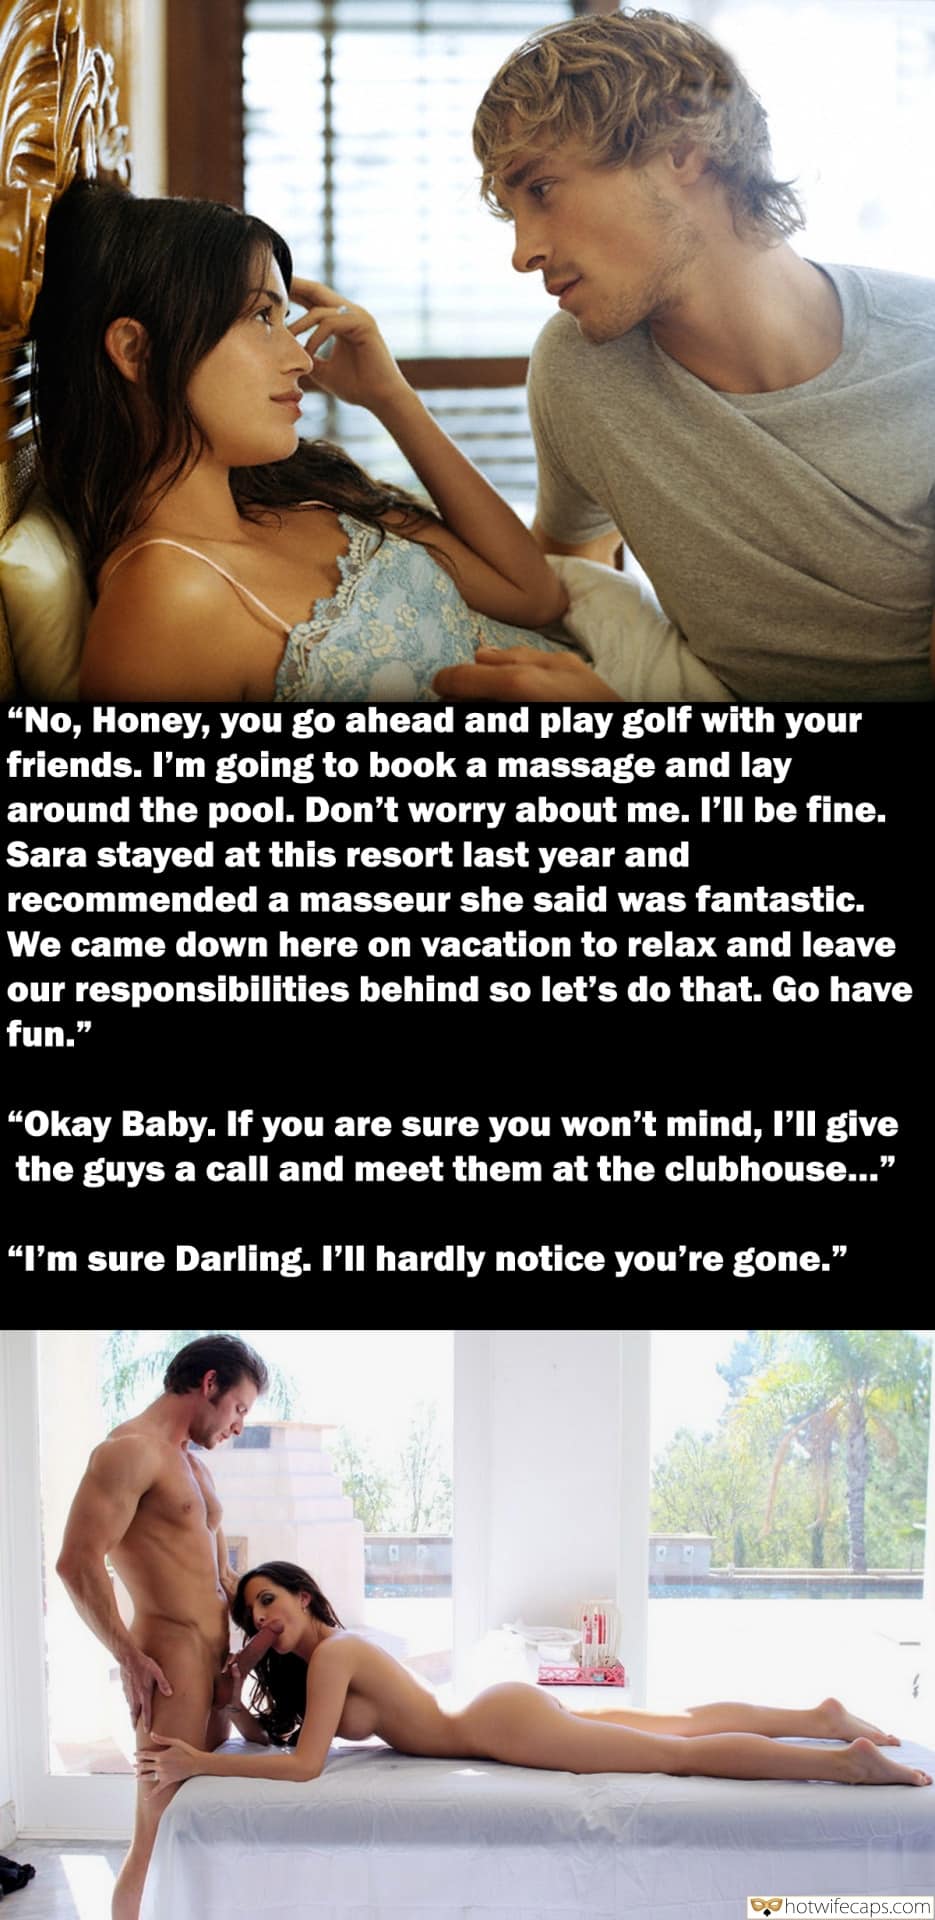 Cheating Blowjob hotwife caption: “No, Honey, you go ahead and play golf with your friends. I’m going to book a massage and lay around the pool. Don’t worry about me. I’ll be fine. Sara stayed at this resort last year and recommended a masseur...